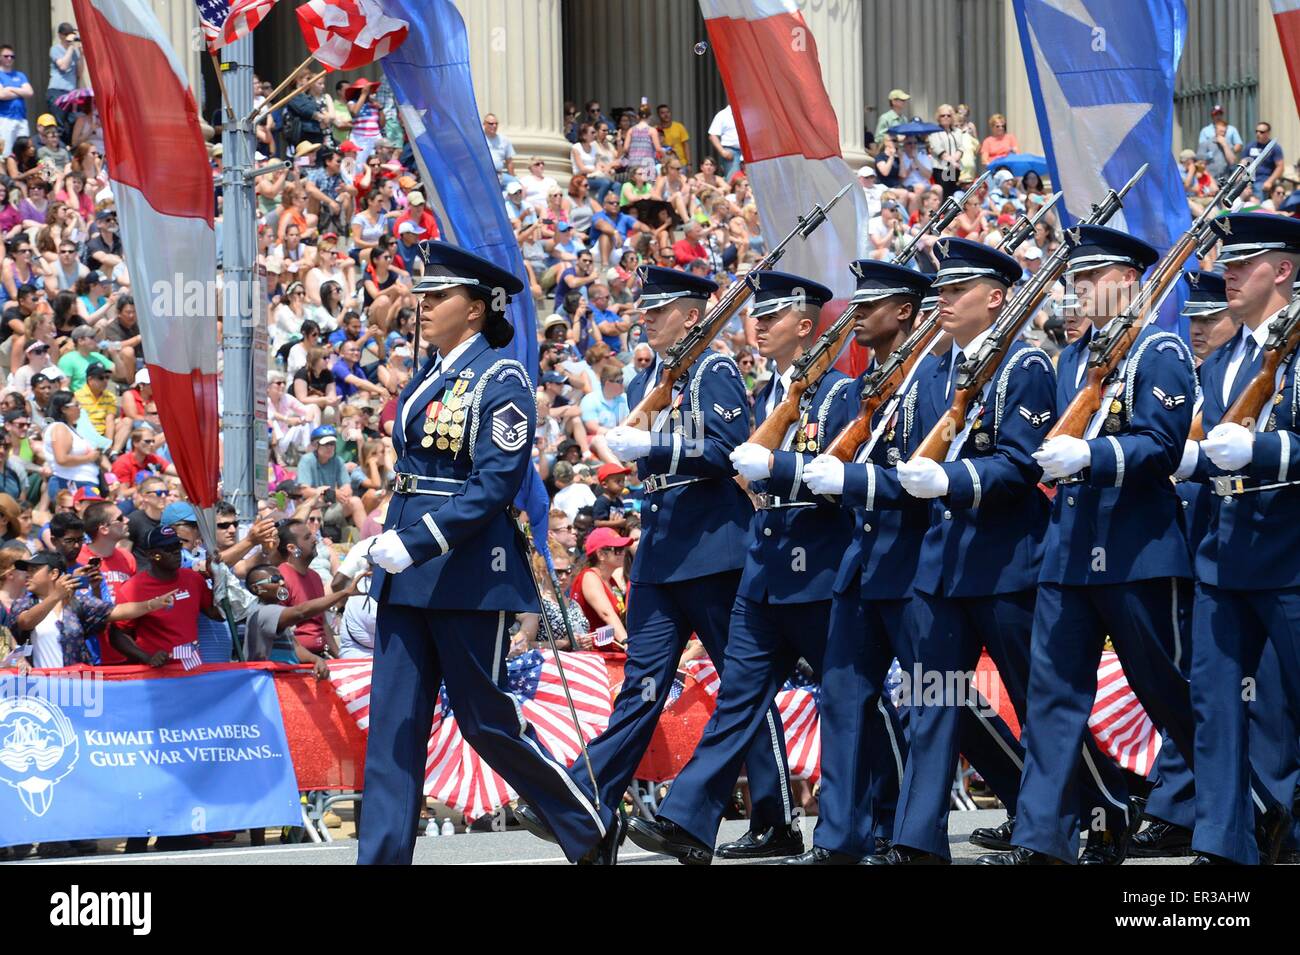 The U.S. Air Force Honor Guard marches during the National Memorial Day Parade in Washington, D.C., May 25, 2015.  The National Memorial Day Parade was first launched in 2005 by the American Veterans Center in Washington, and this year Air Force Chief of Staff Gen. Mark A. Welsh III served as the grand marshal. Welsh also honored American Veterans by attending a wreath laying ceremony in Arlington National Cemetery. Stock Photo